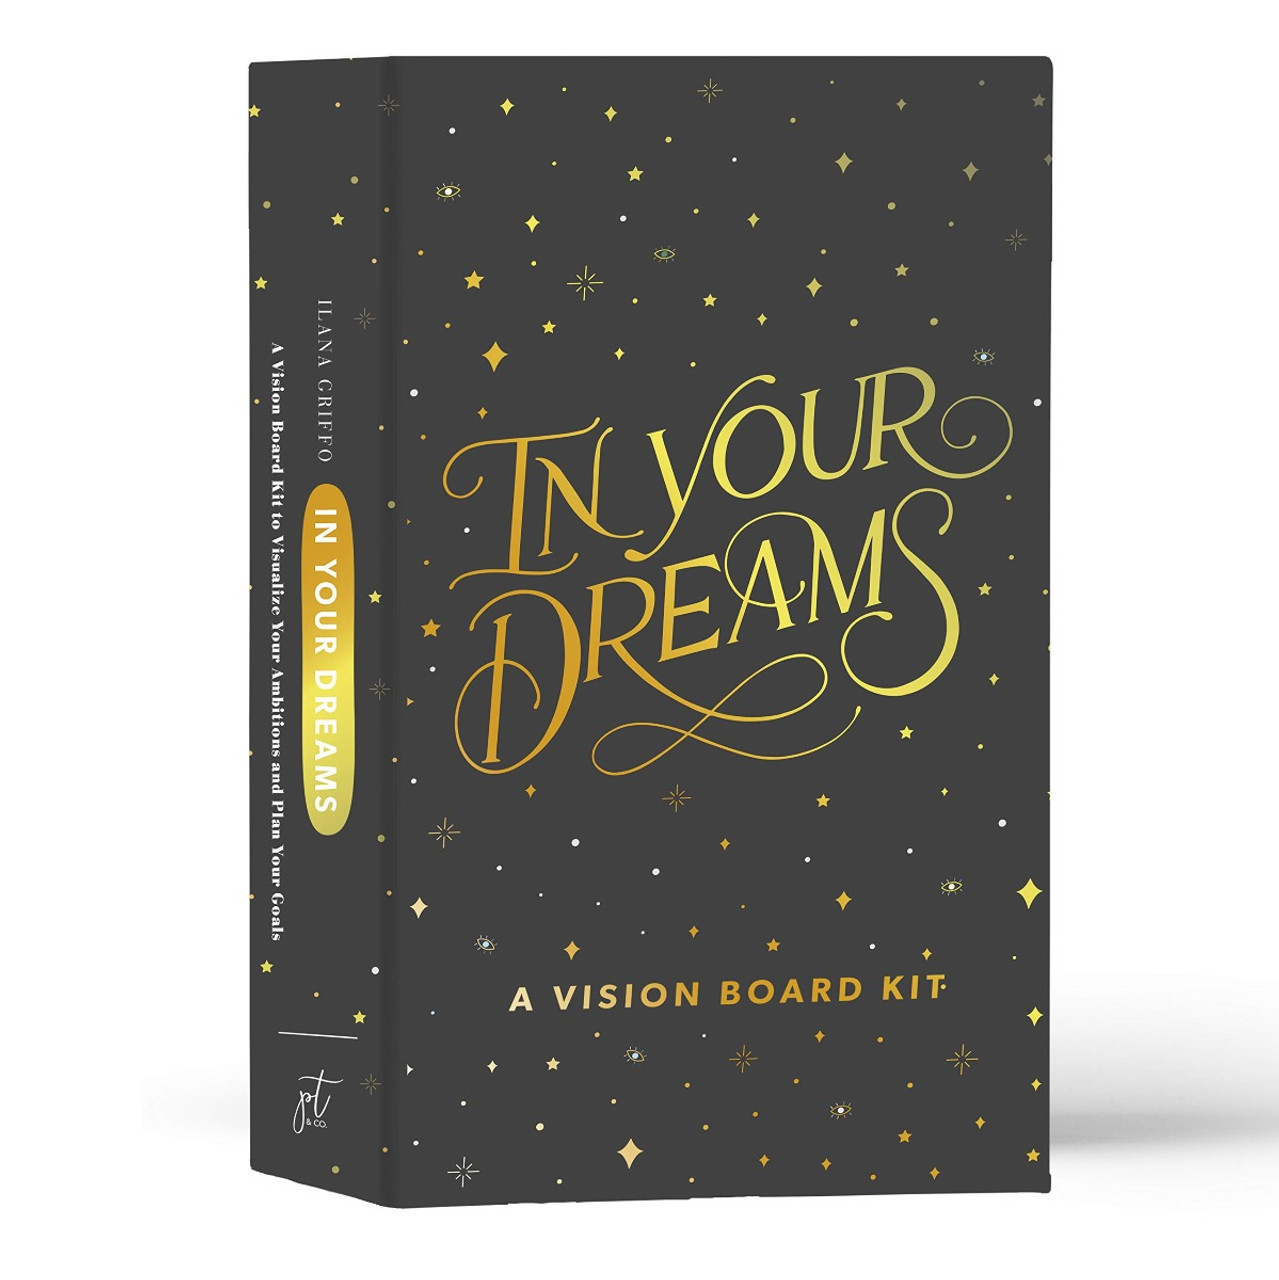 In Your Dreams: A Vision Board Kit to Visualize Your Ambitions and